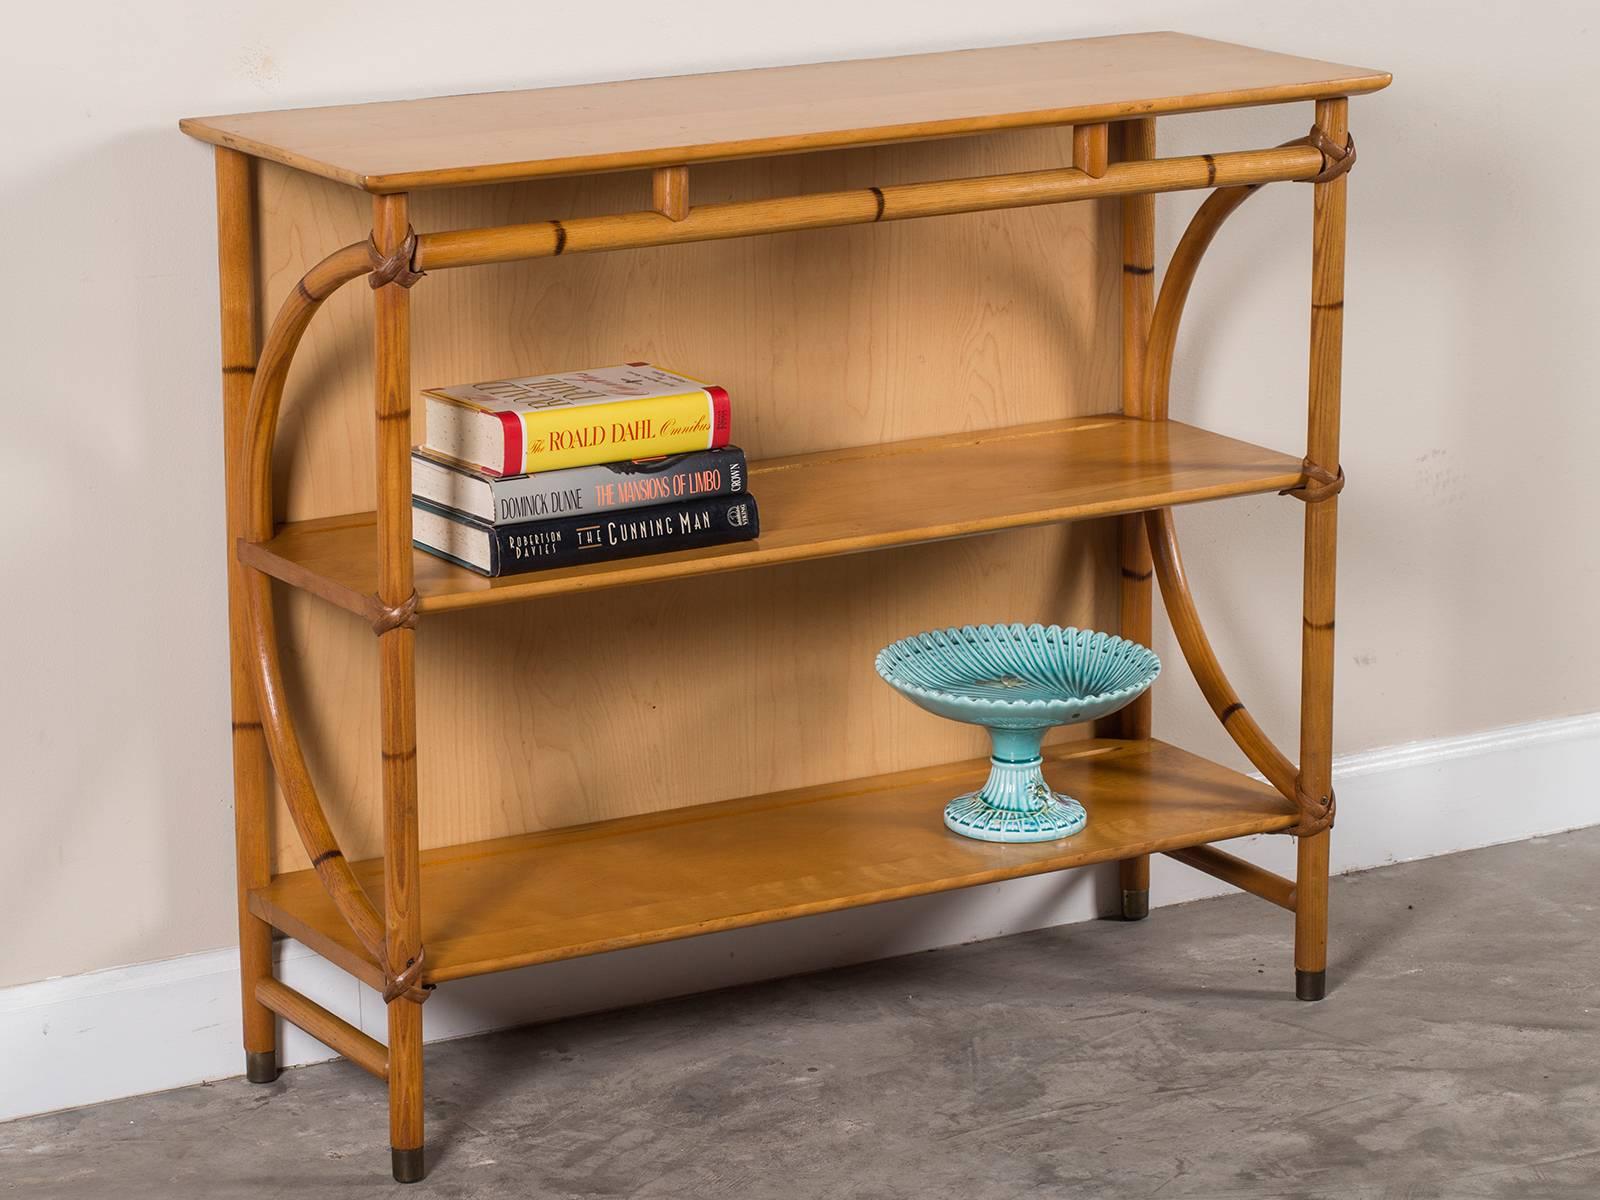 Be the first to see our new arrivals directly through 1stdibs! Please click follow dealer below. 

The elegant lines and perfect scale of this vintage Heywood Wakefield bamboo étagère display shelves, circa 1950 make this a terrific piece of